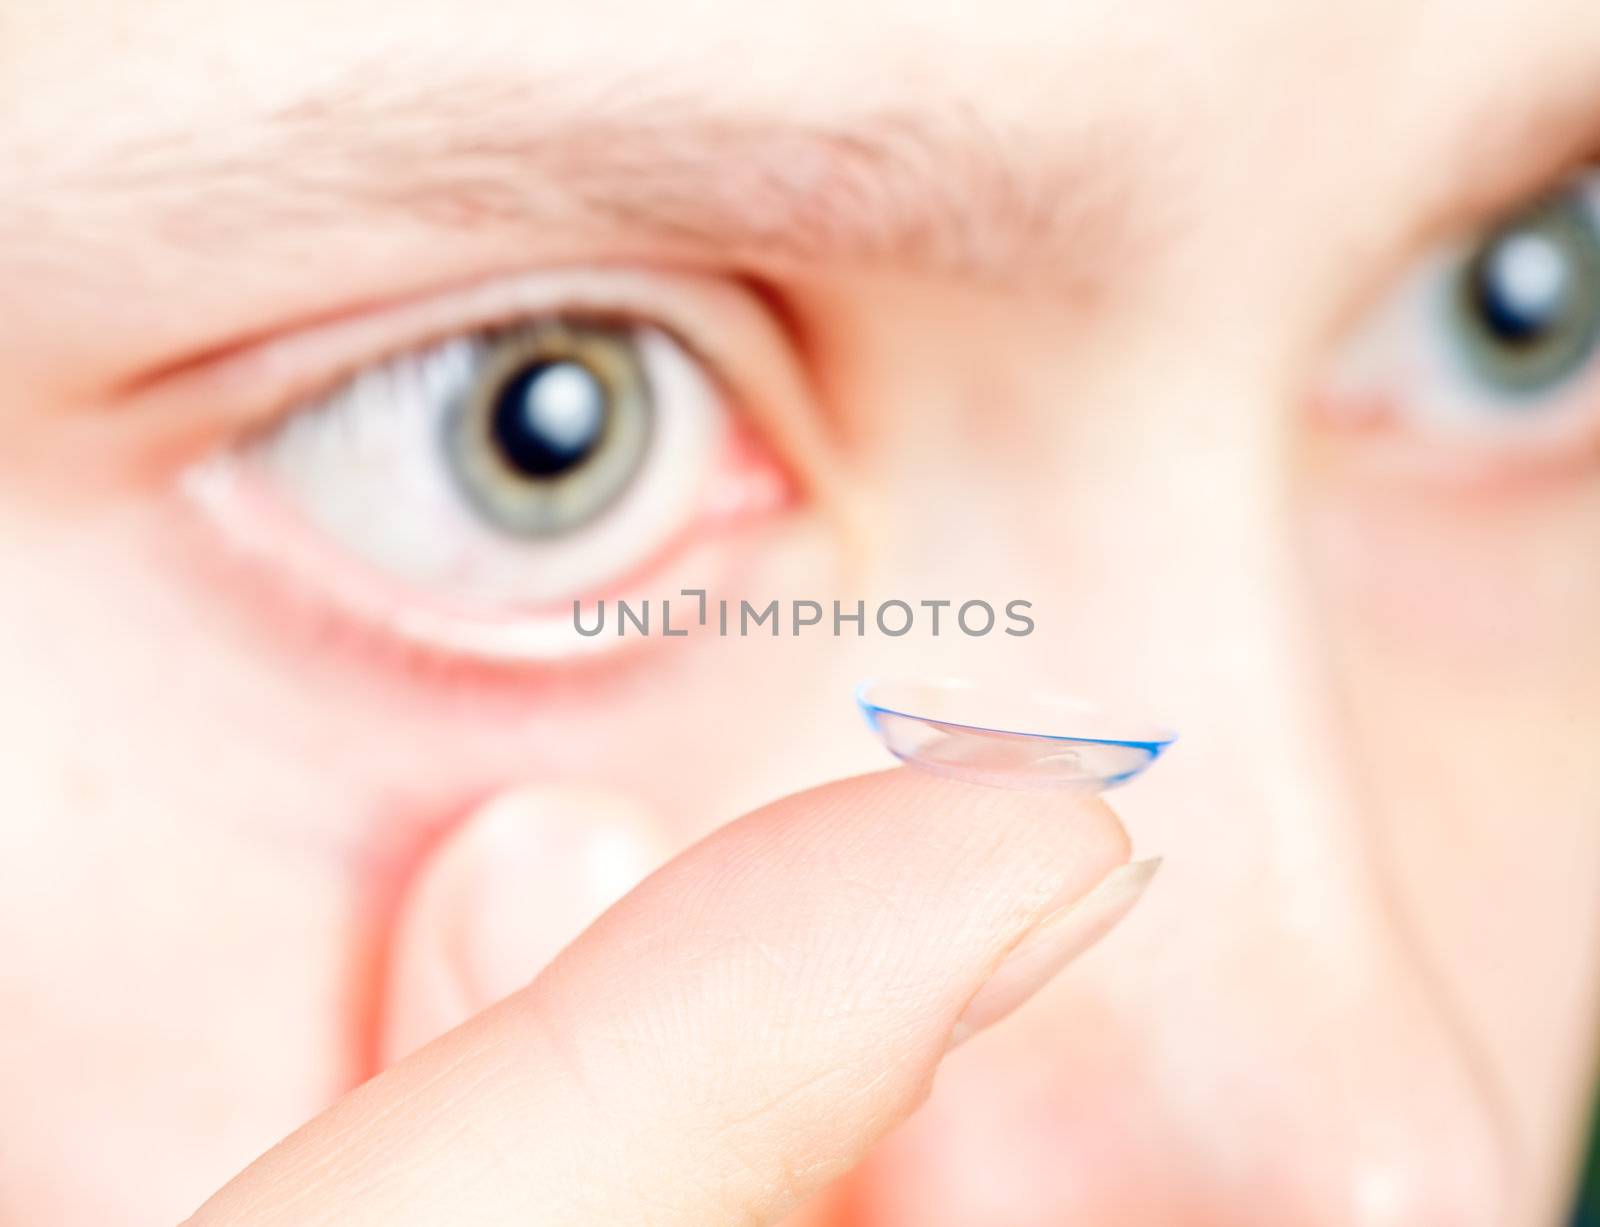 Contact lens by naumoid